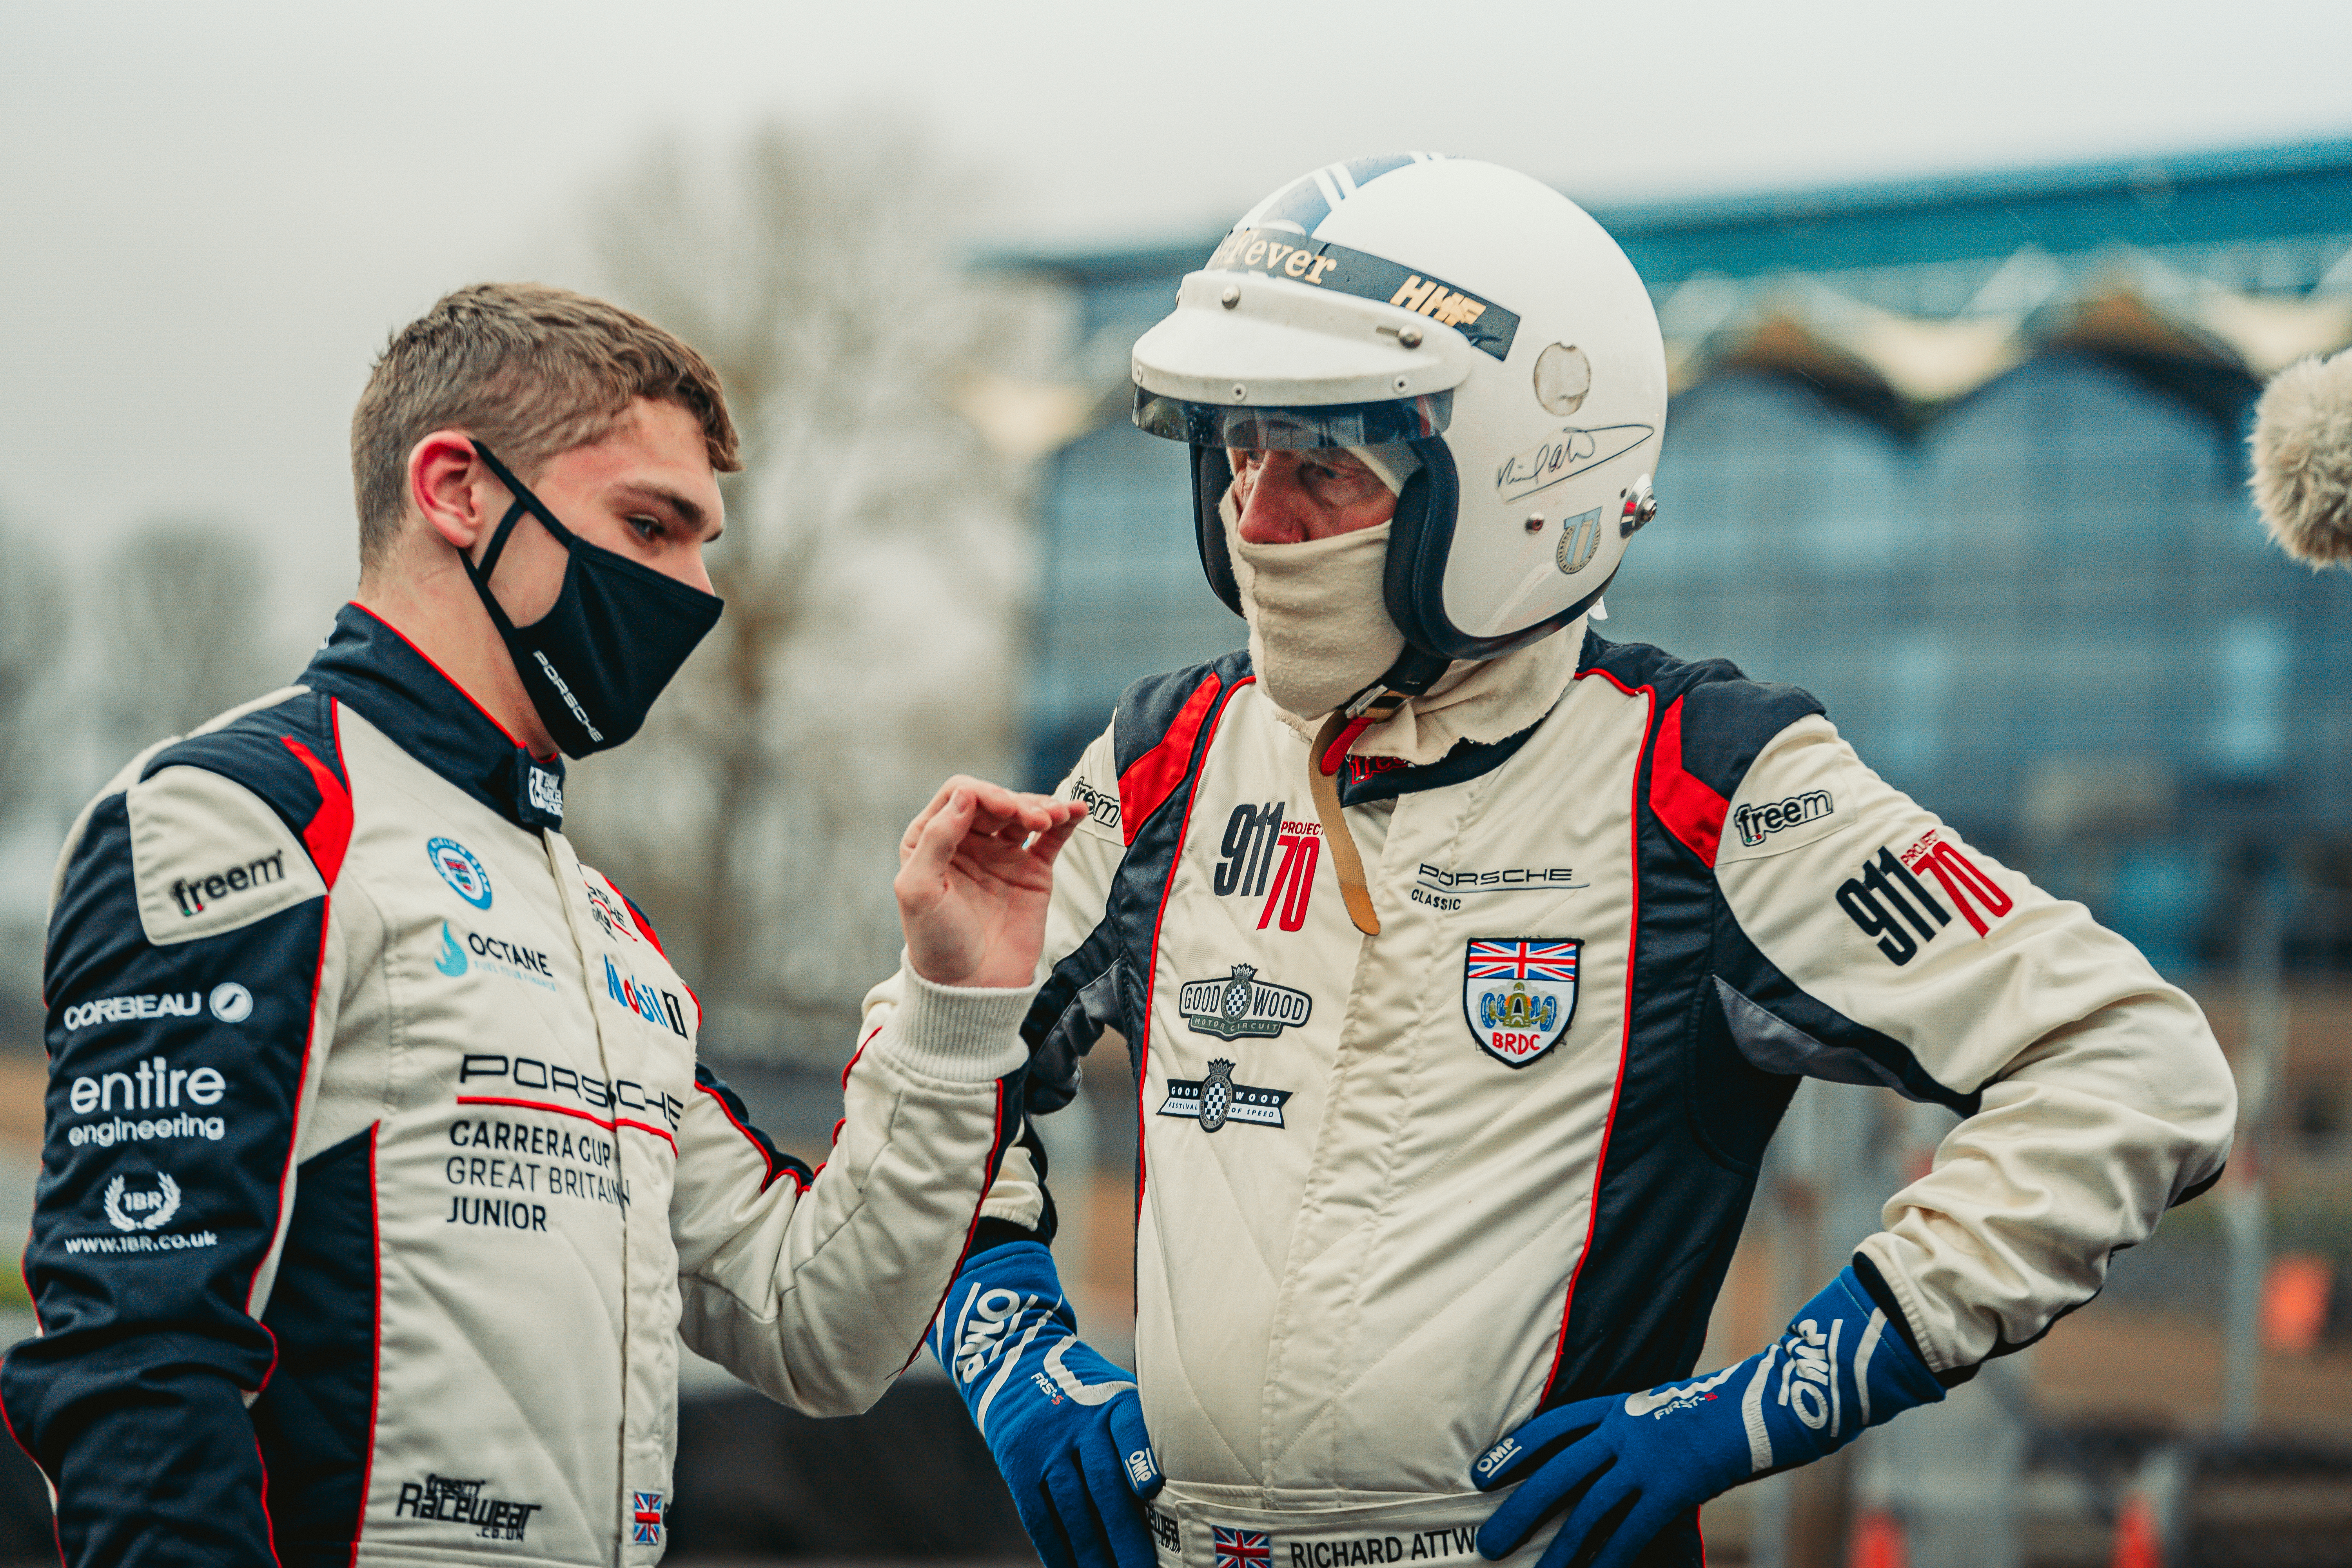 Two drivers in racesuits, one in helmet, in discussion